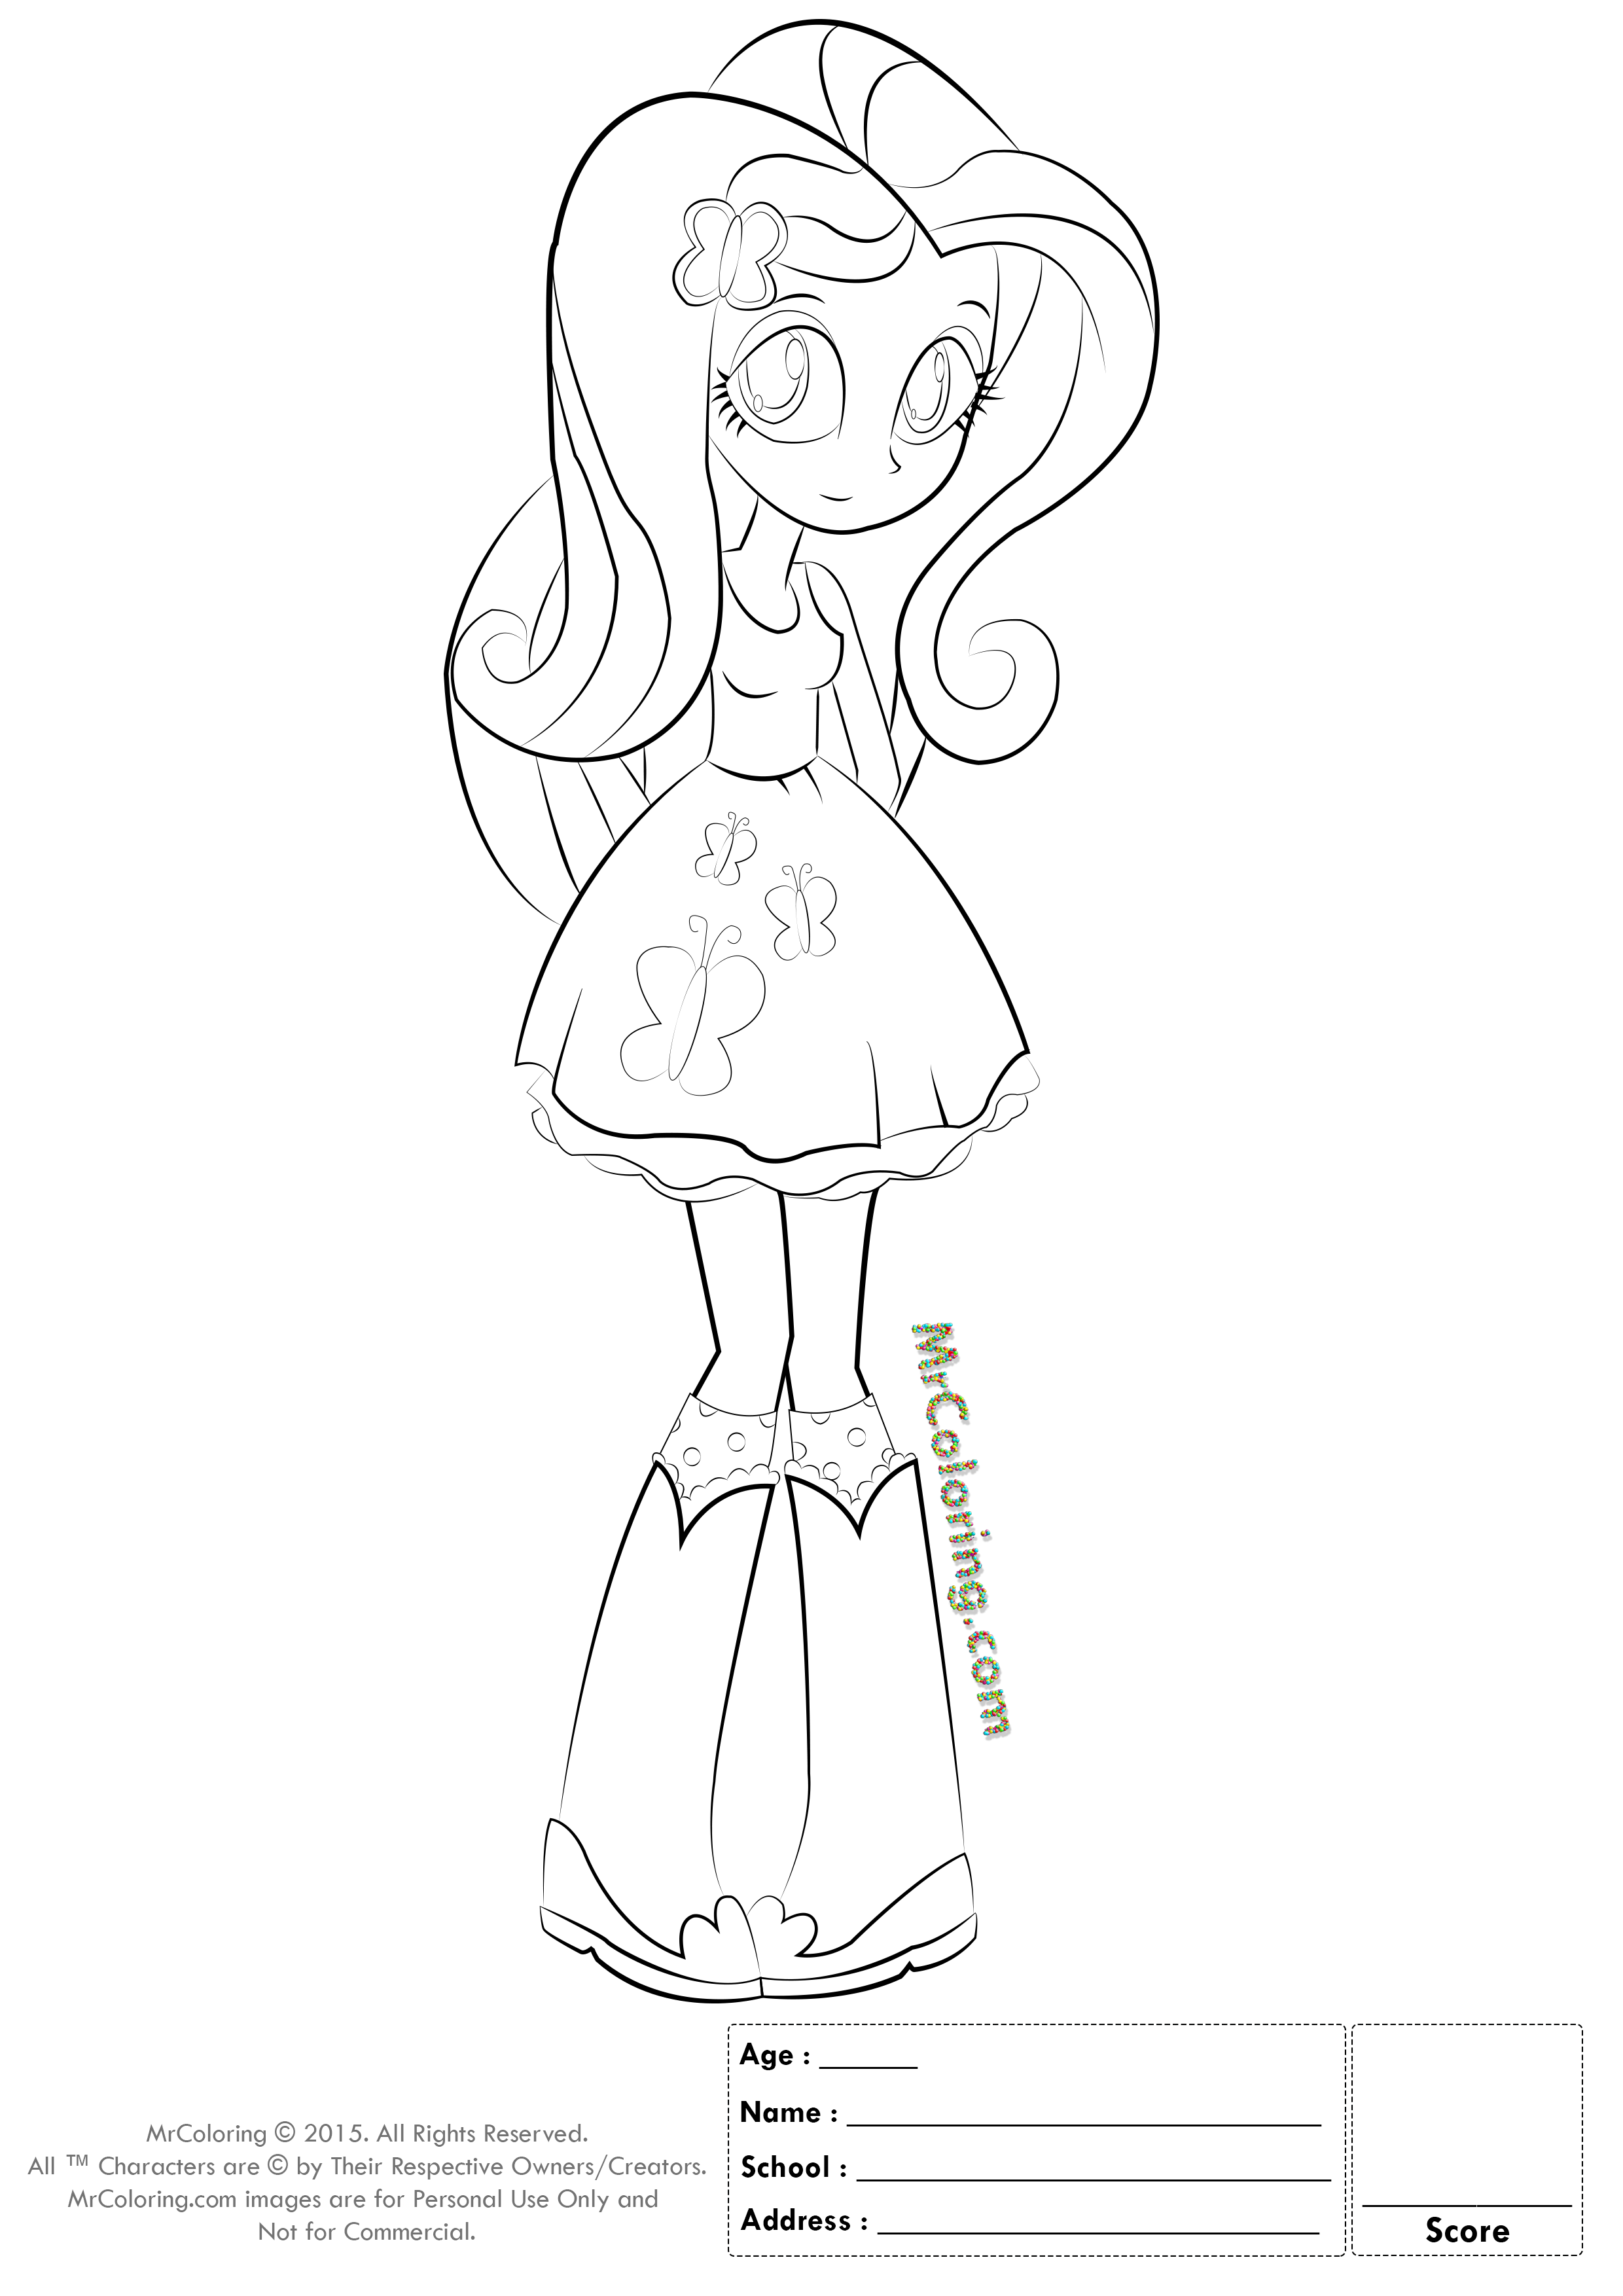 11 Pics of Equestria Girls Coloring Pages Printable - MLP ...